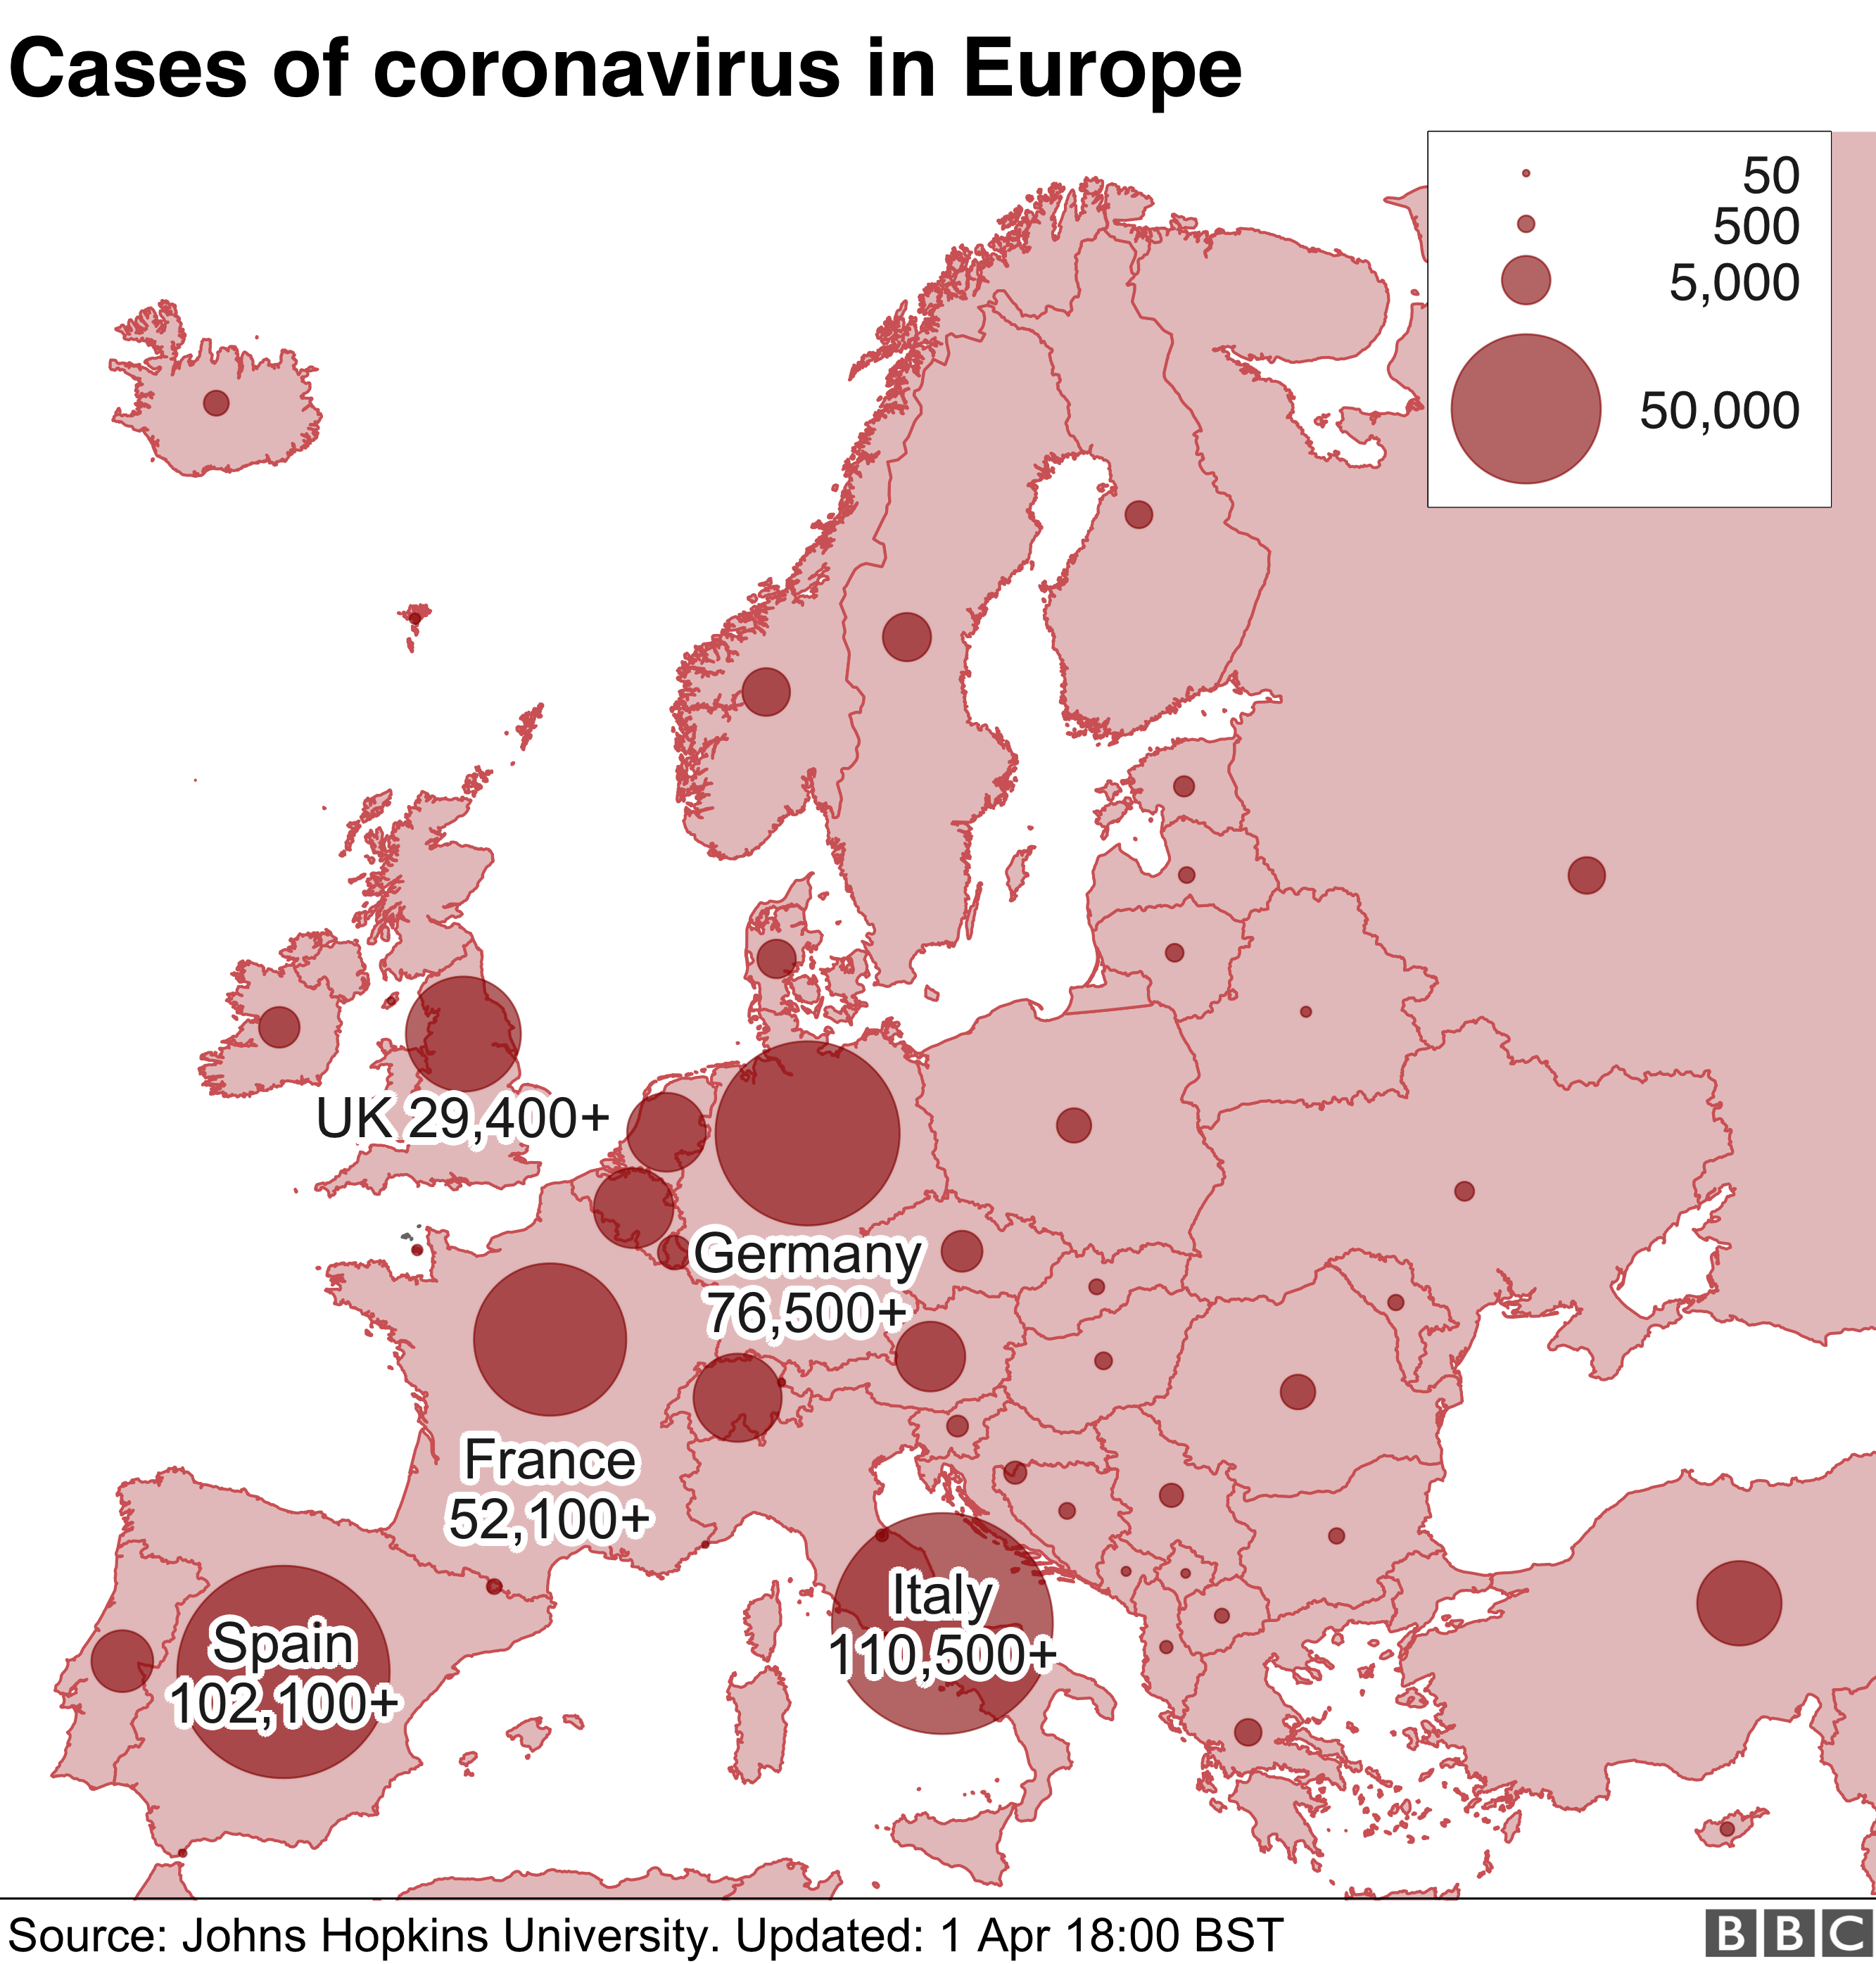 Map of Europe showing cases in key countries